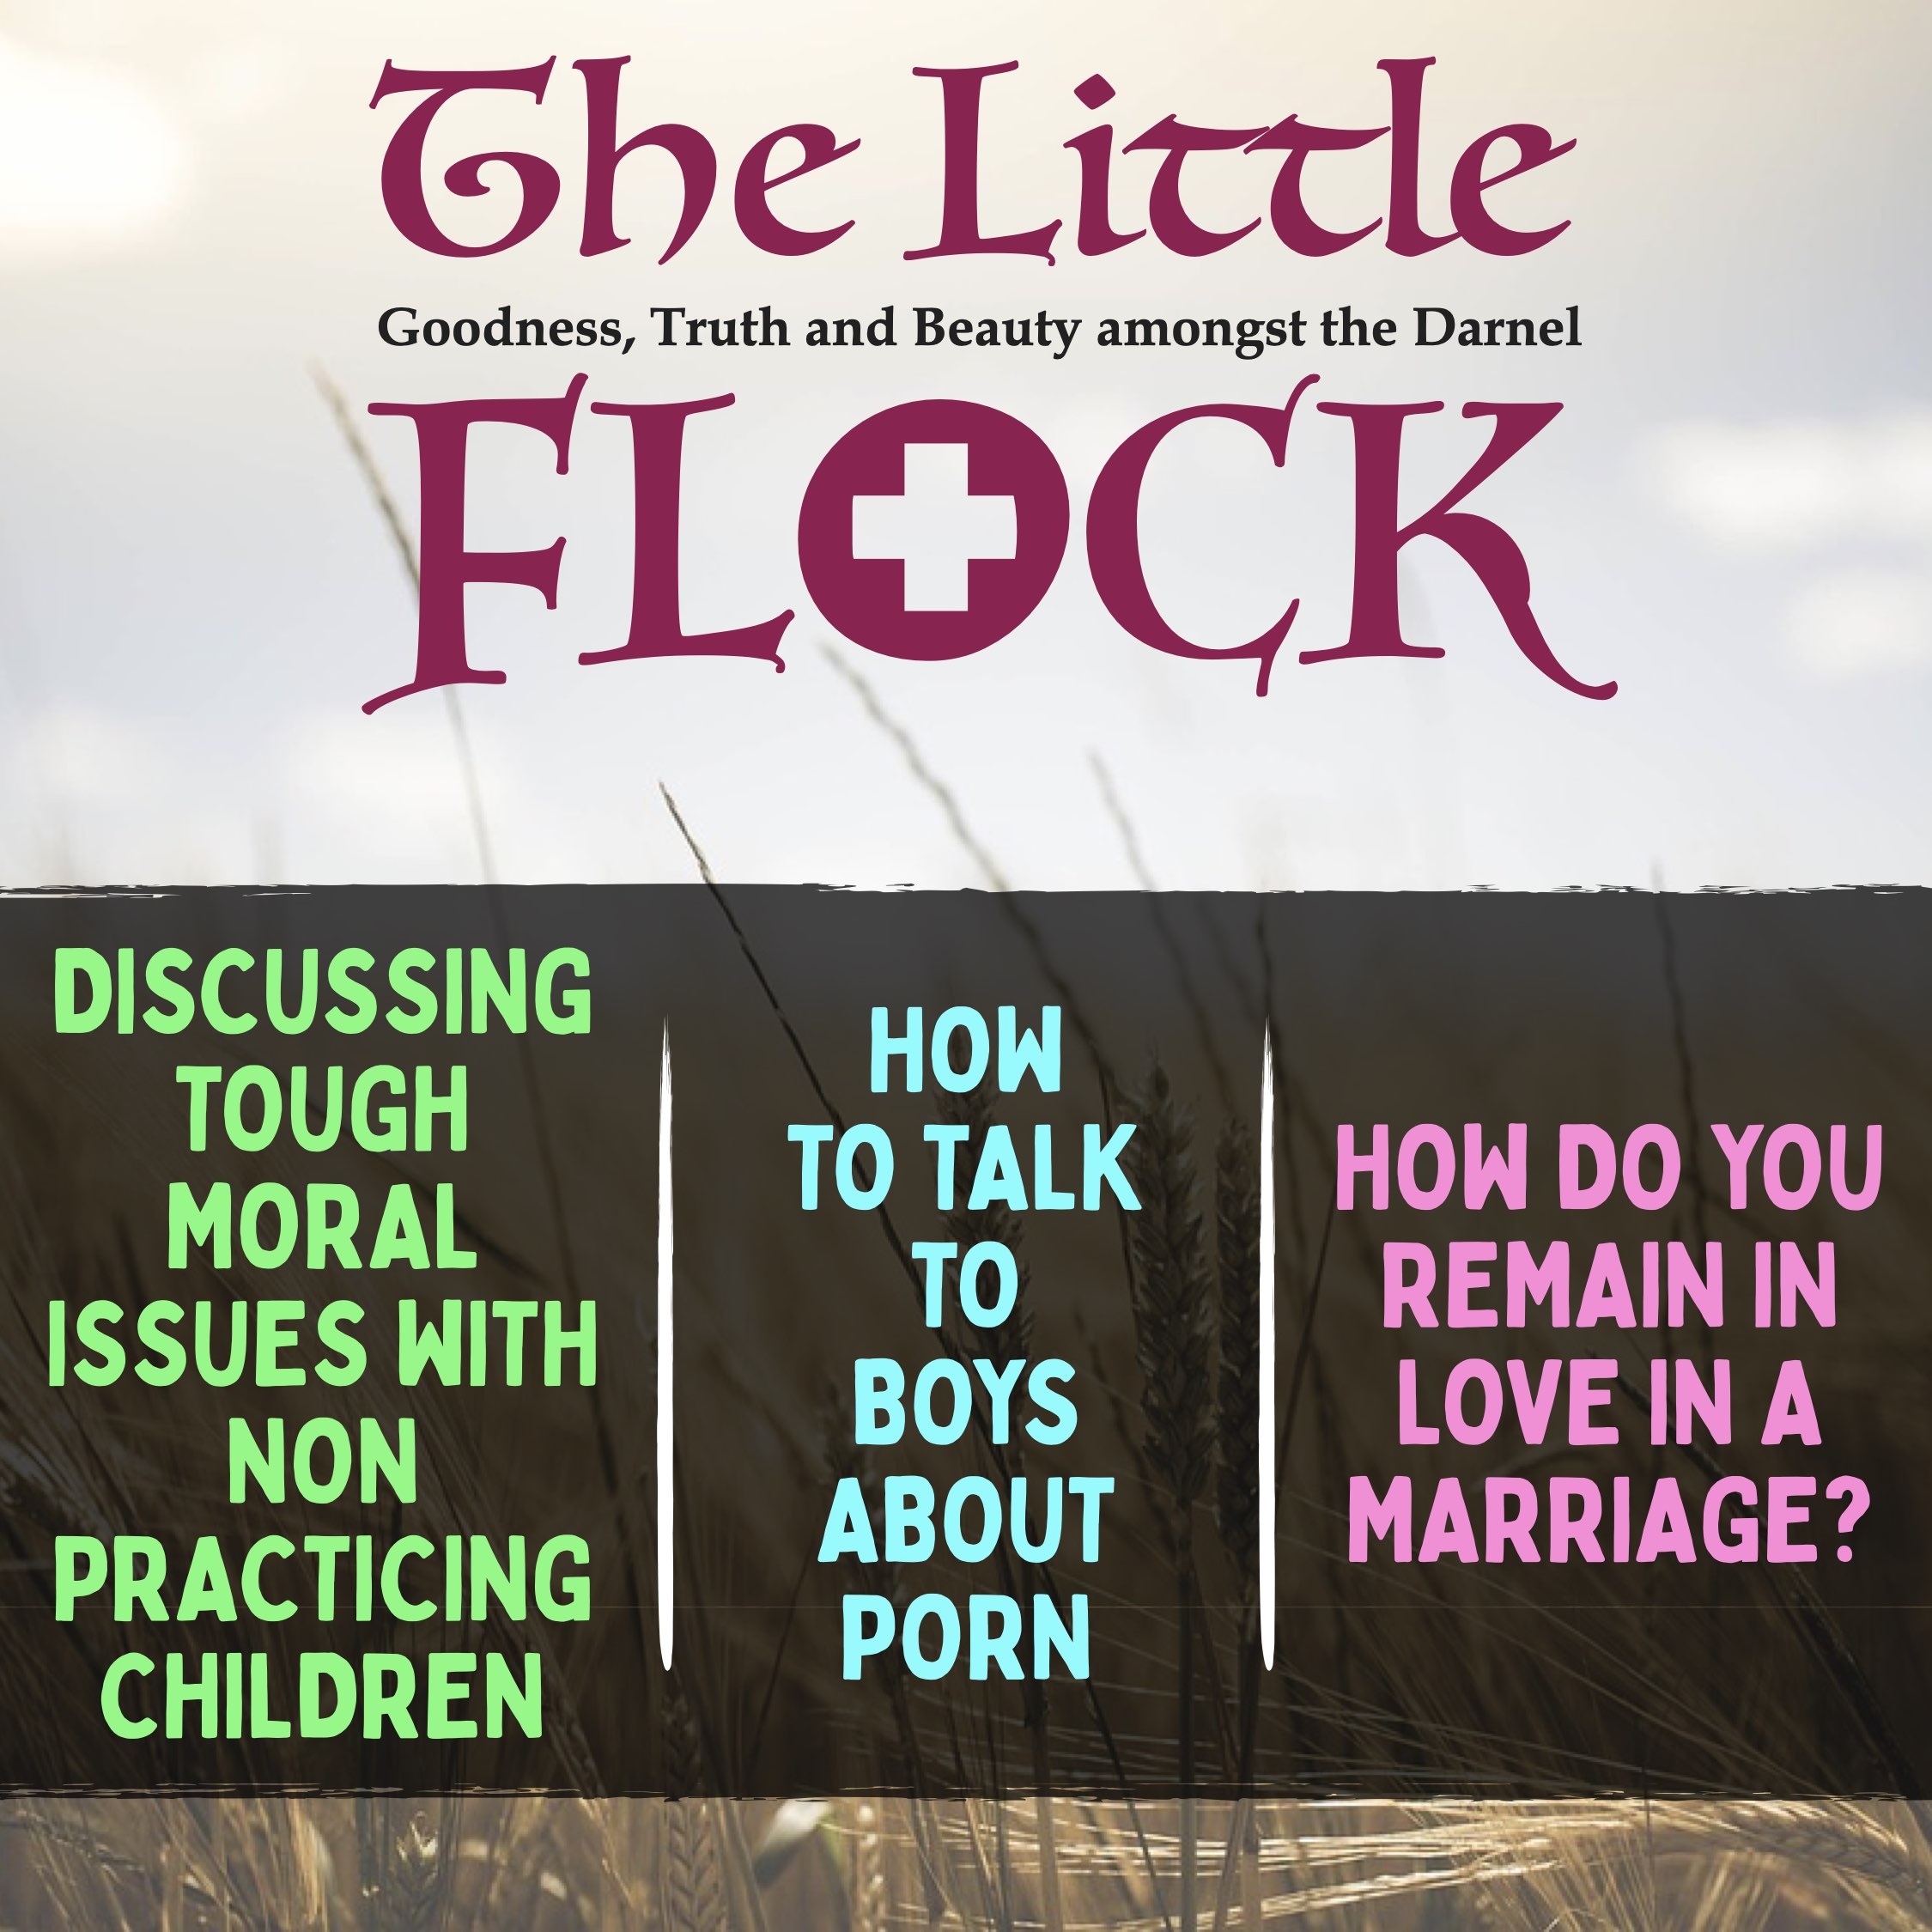 5. Discussing Tough Moral Issues with Non-Practicing Children, How to Talk to Boys About Porn, How do you Remain in Love?